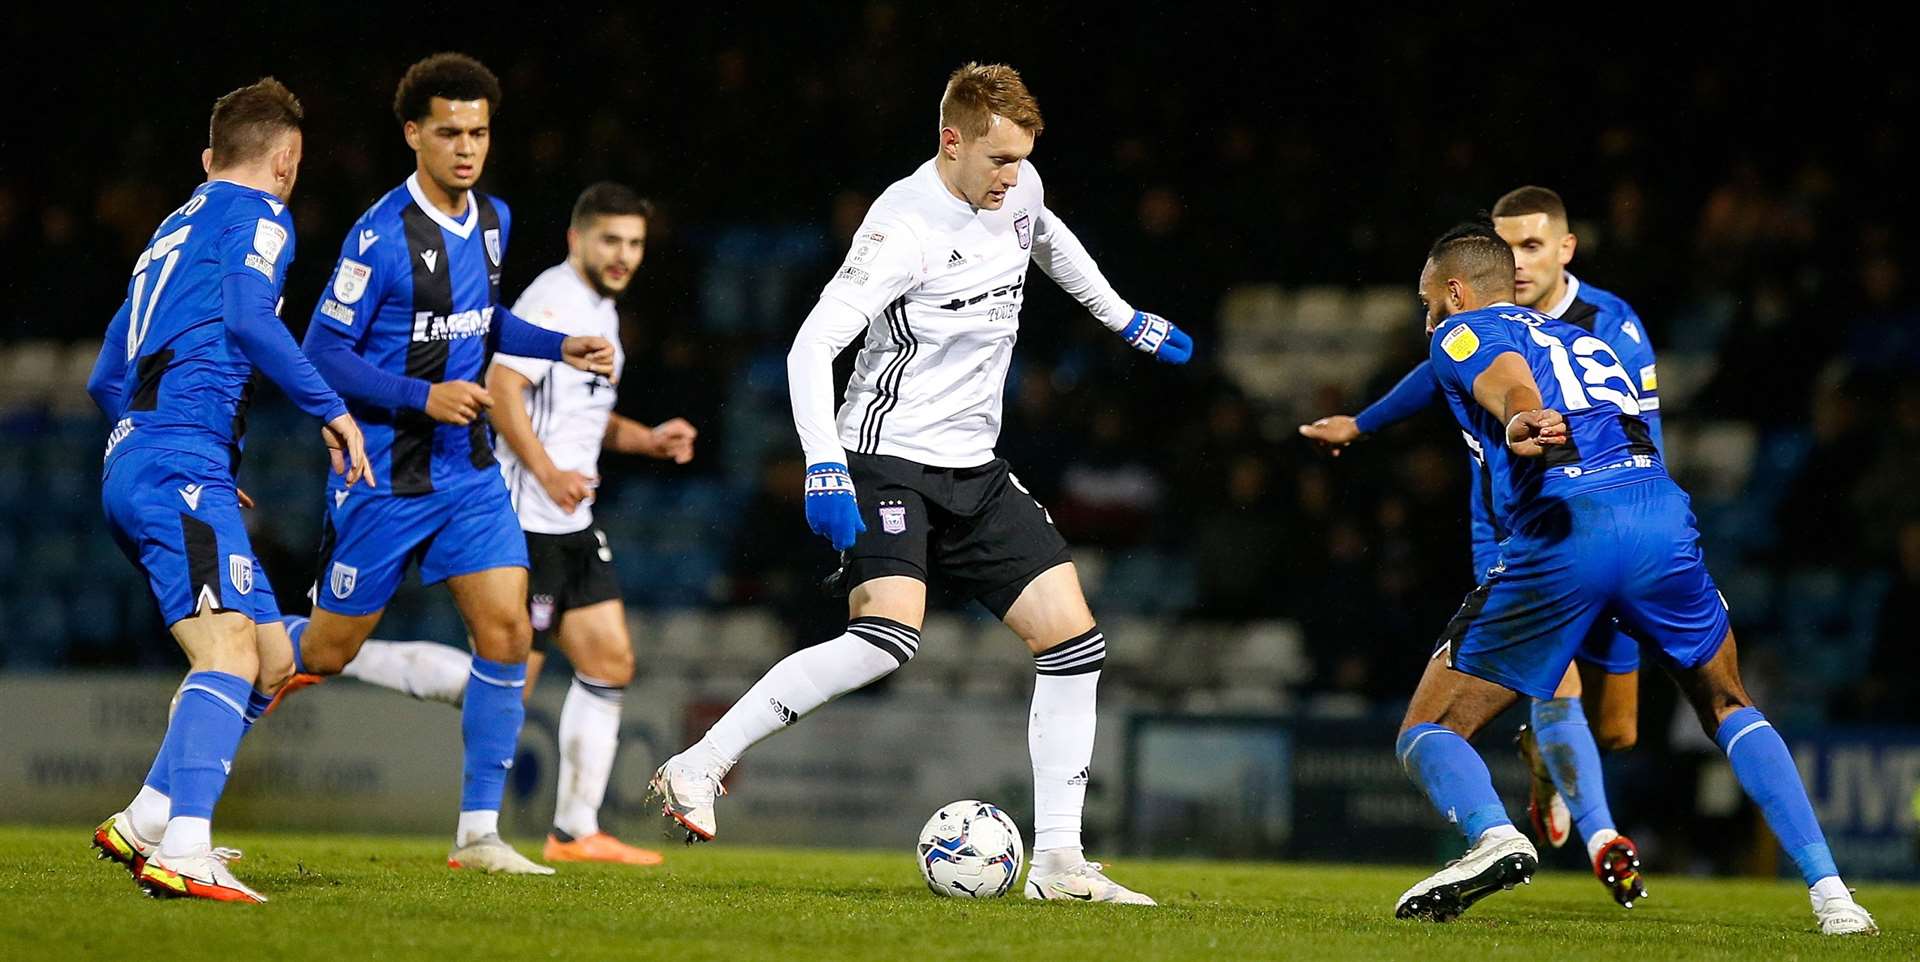 Former Maidstone United forward Joe Pigott is outnumbered as Gills go on the defensive. Picture: Andy Jones